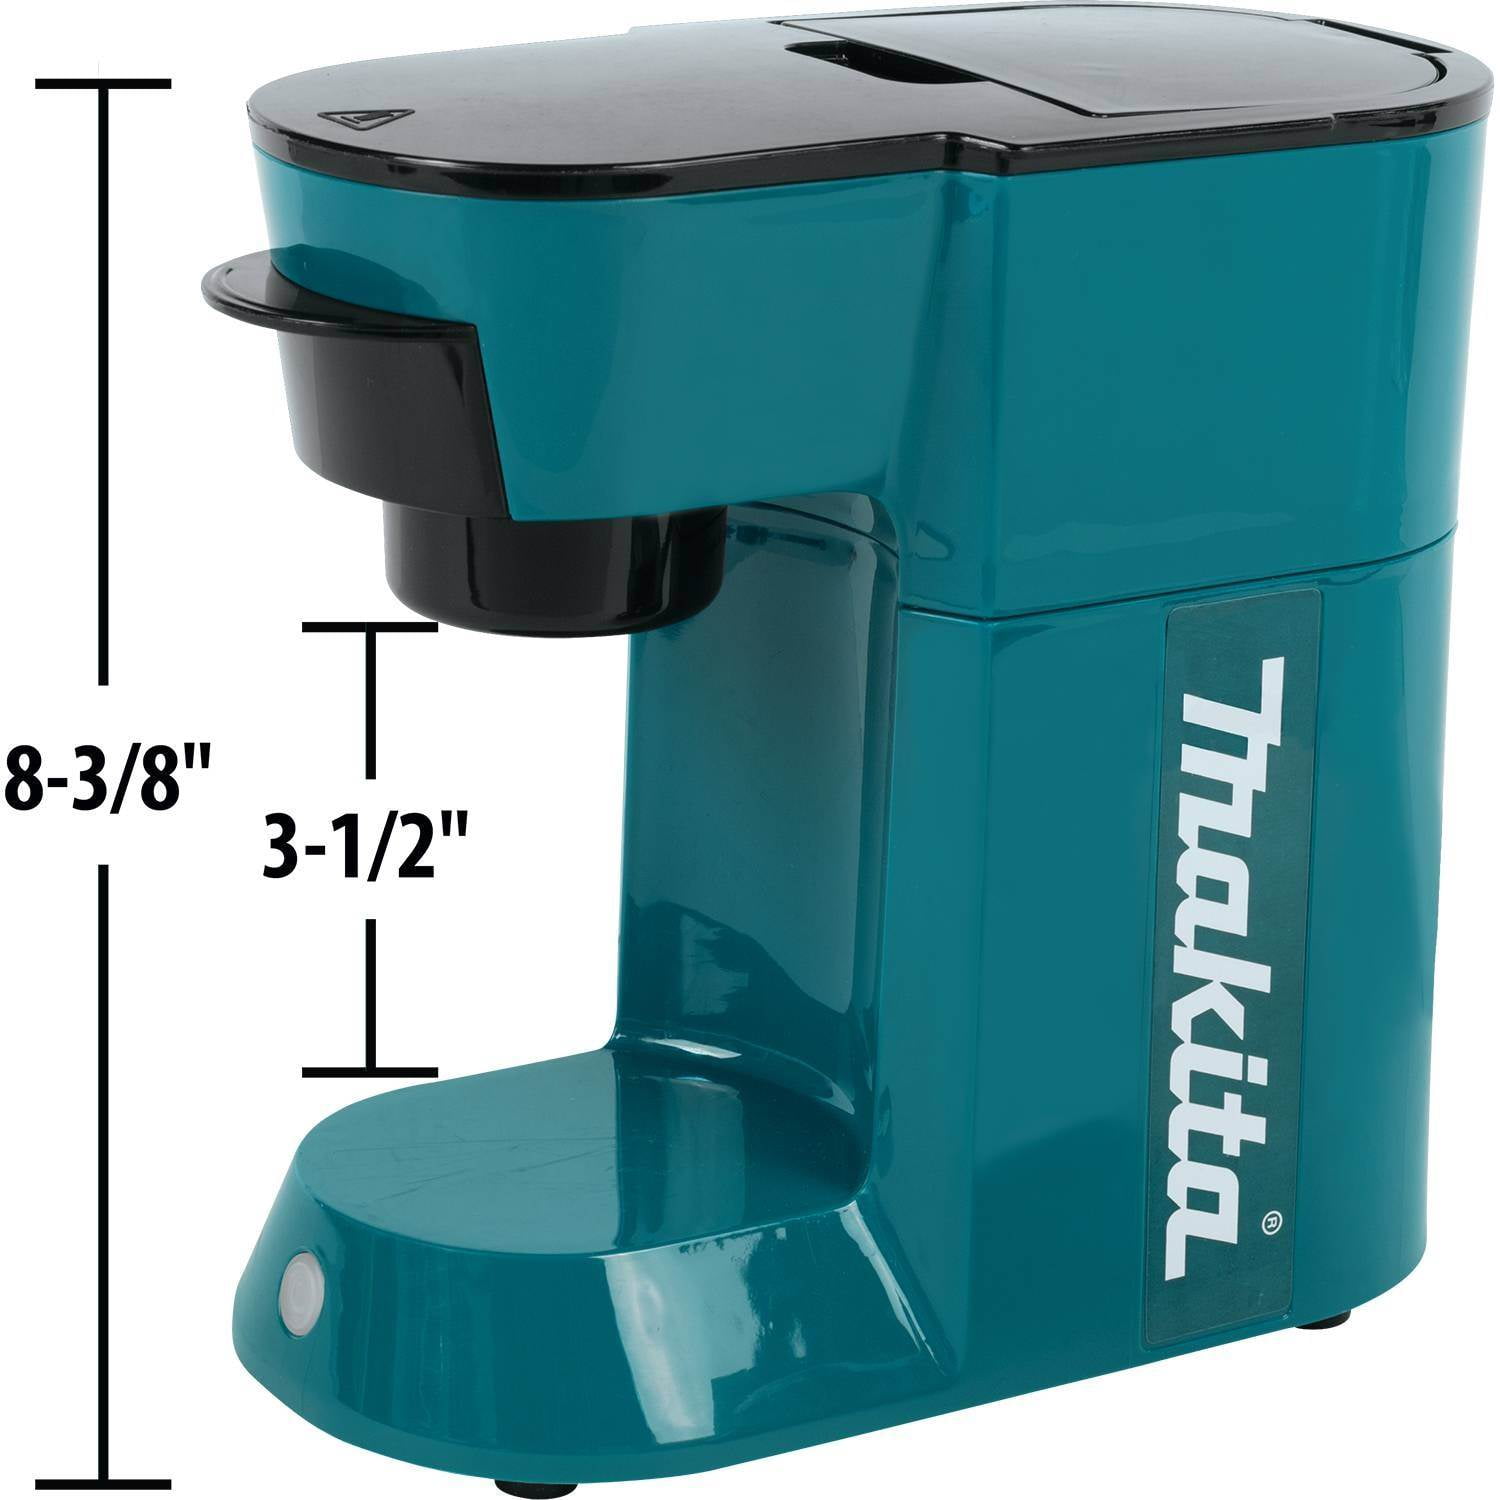 Makita 18V Rechargeable Coffee Maker DCM500Z AC100V BODY ONLY w/ Tracking NEW 